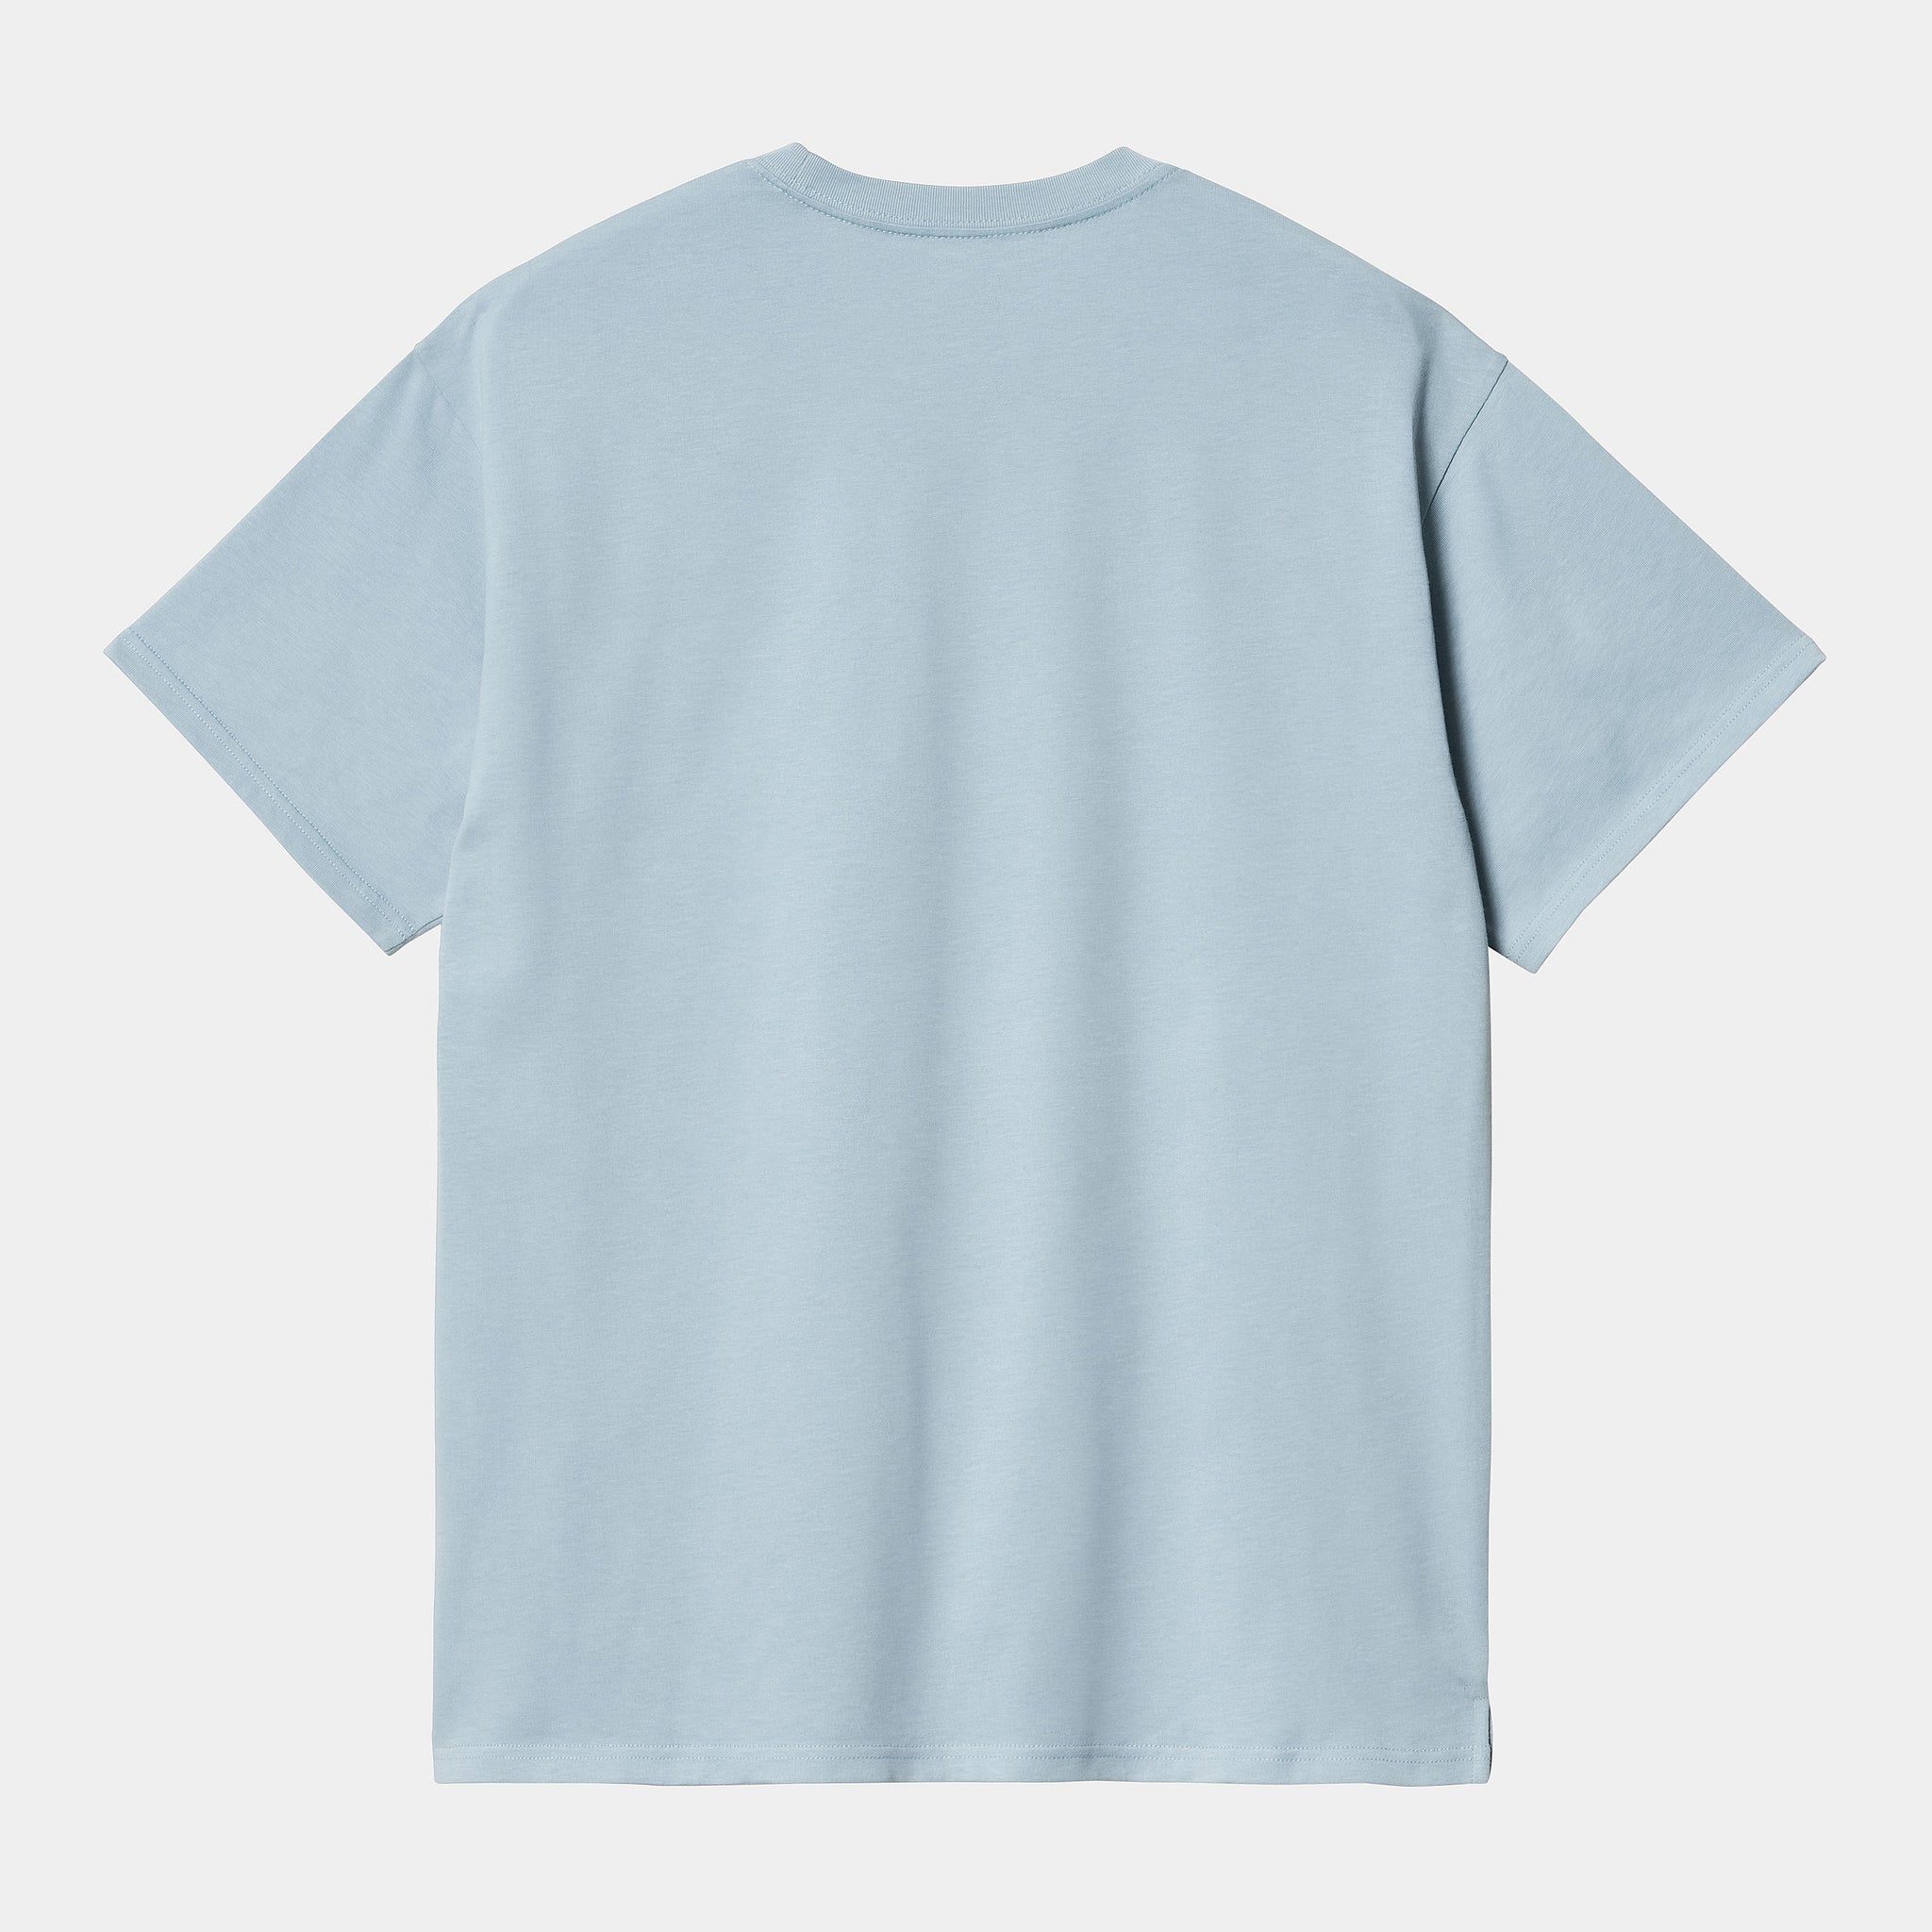 S/S Madison T-Shirt (Frosted Blue/ White)